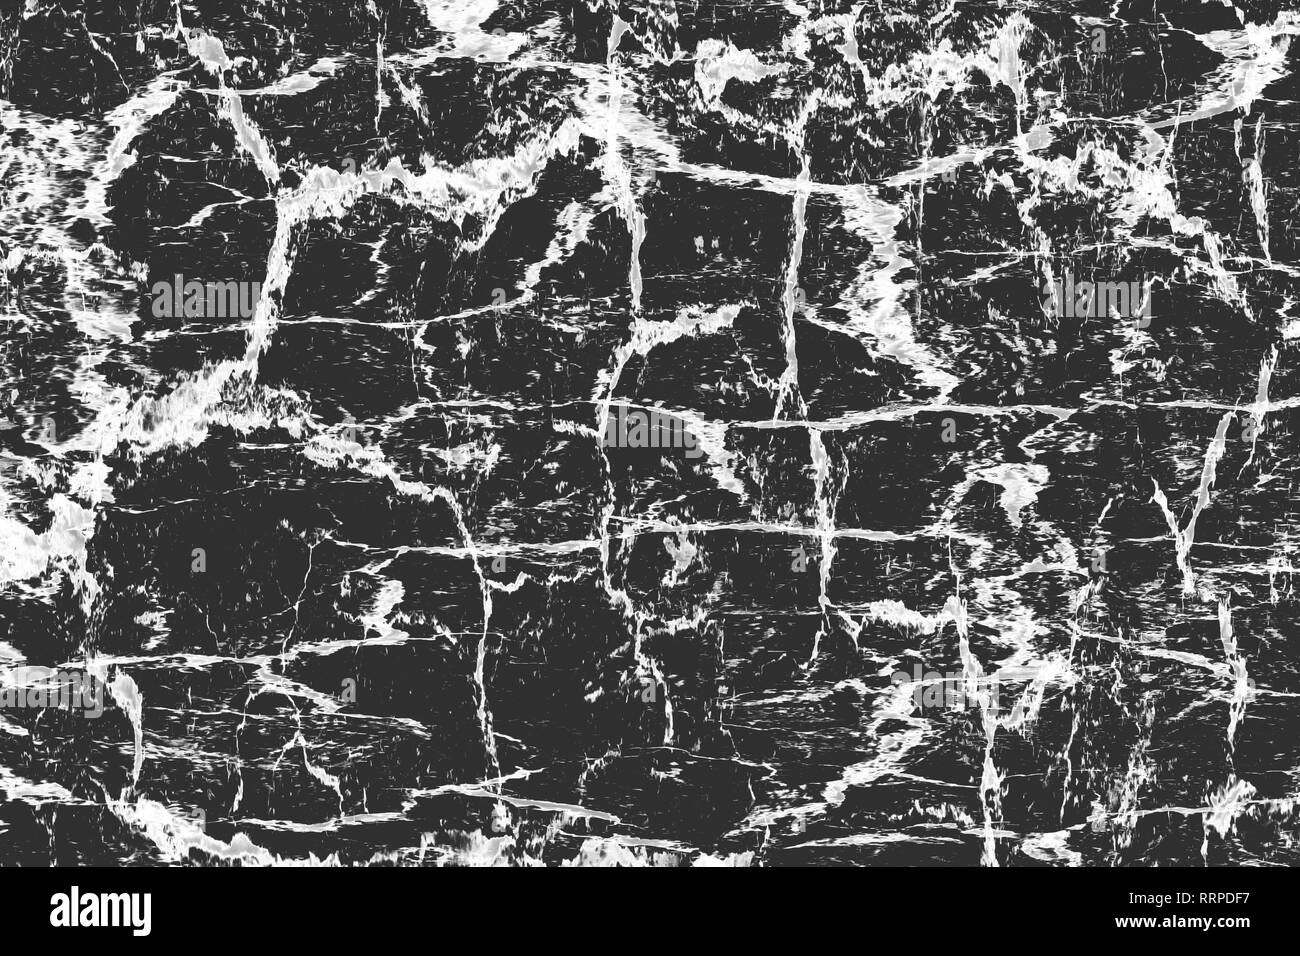 Abstract monochrome background. Texture of black and white in grunge. Pattern of cracks, scratches, stains. Vintage old surface. Stock Photo